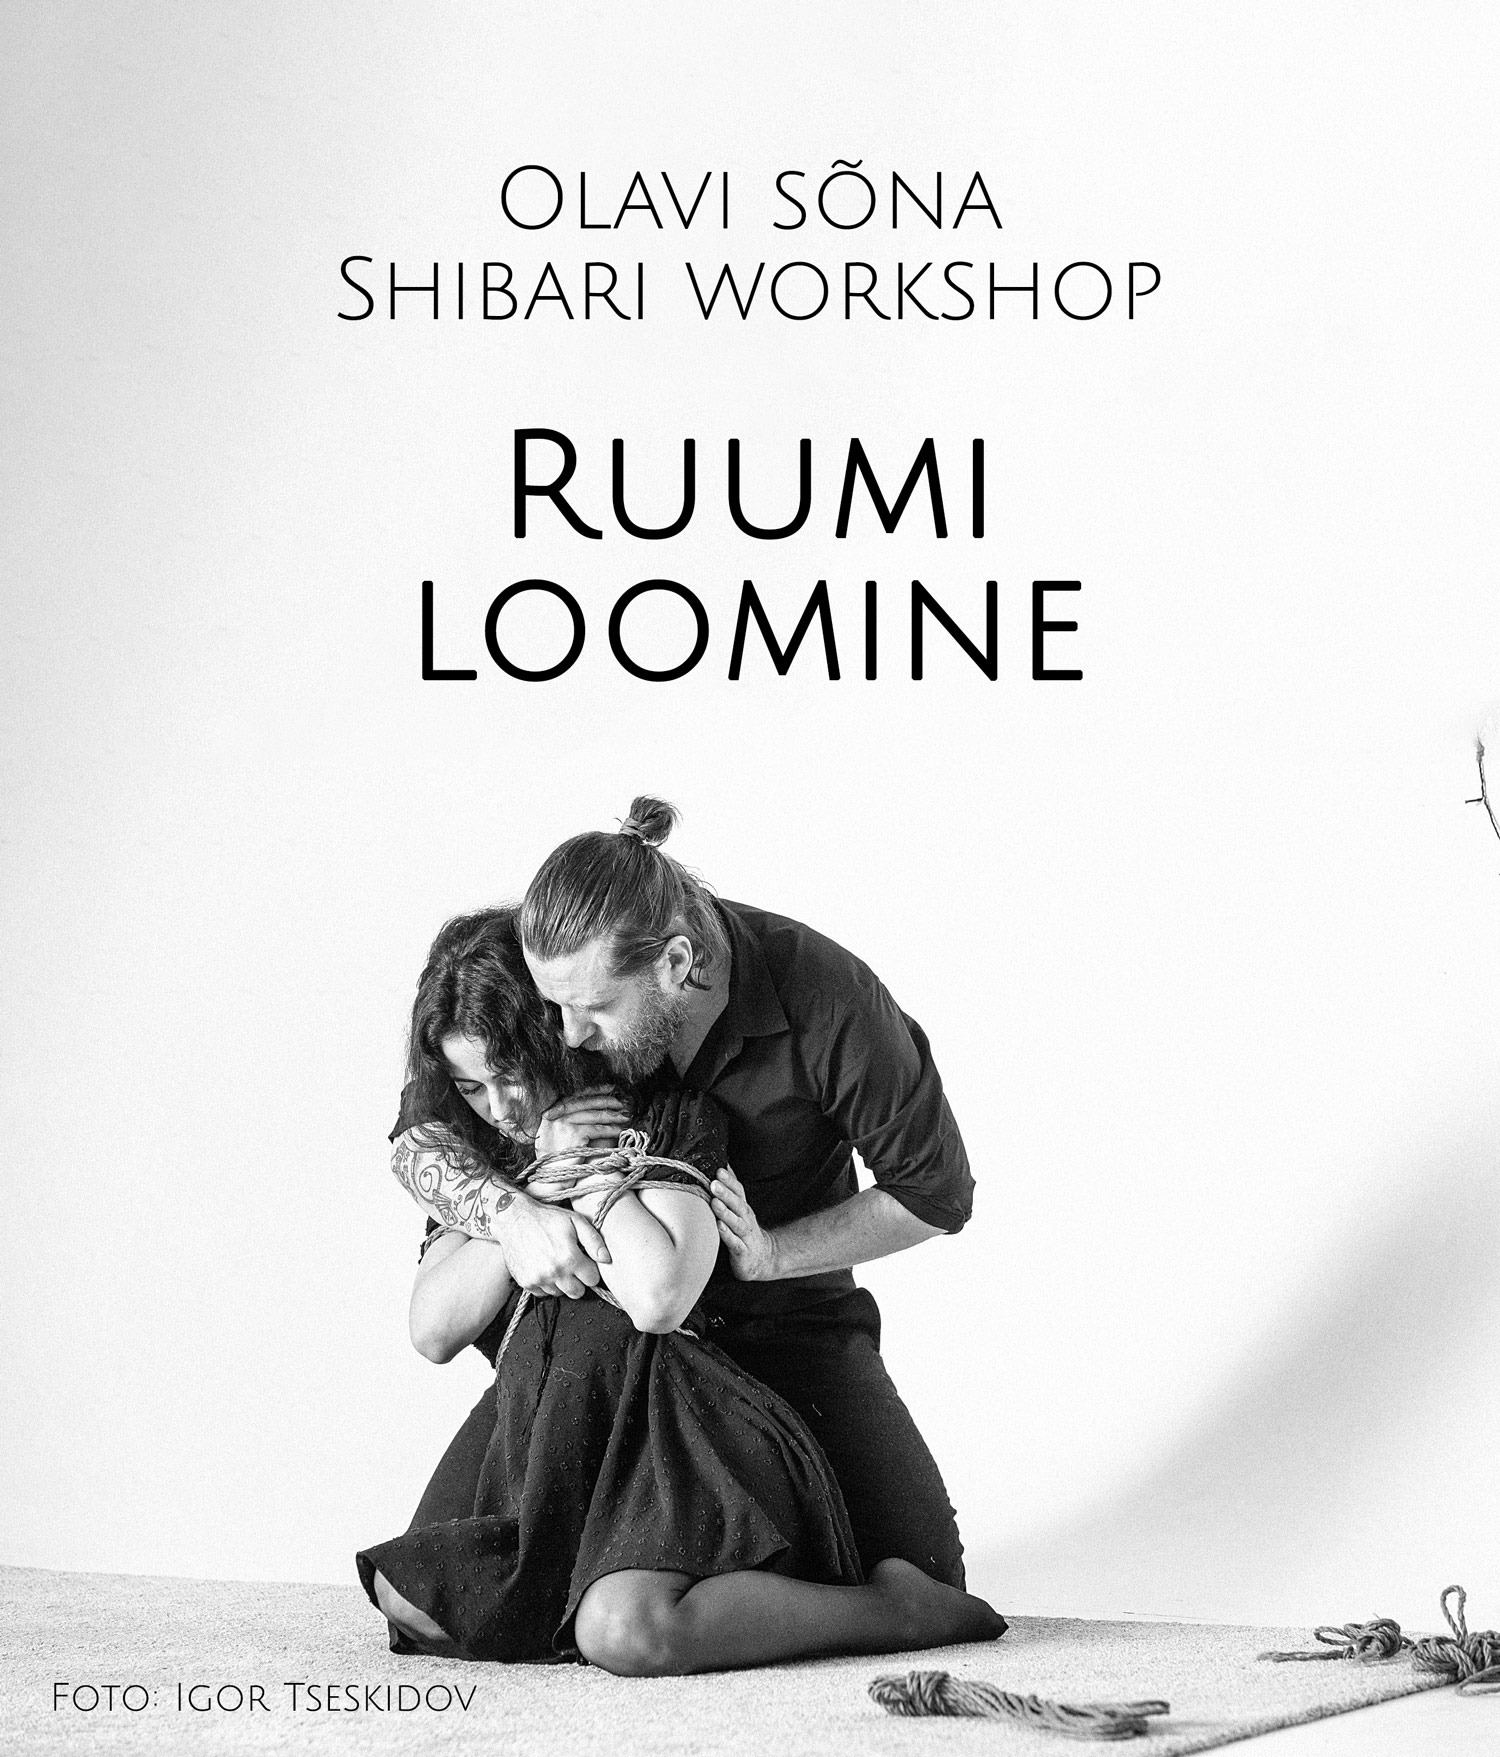 Featured image for “Ruumi loomise workshop”